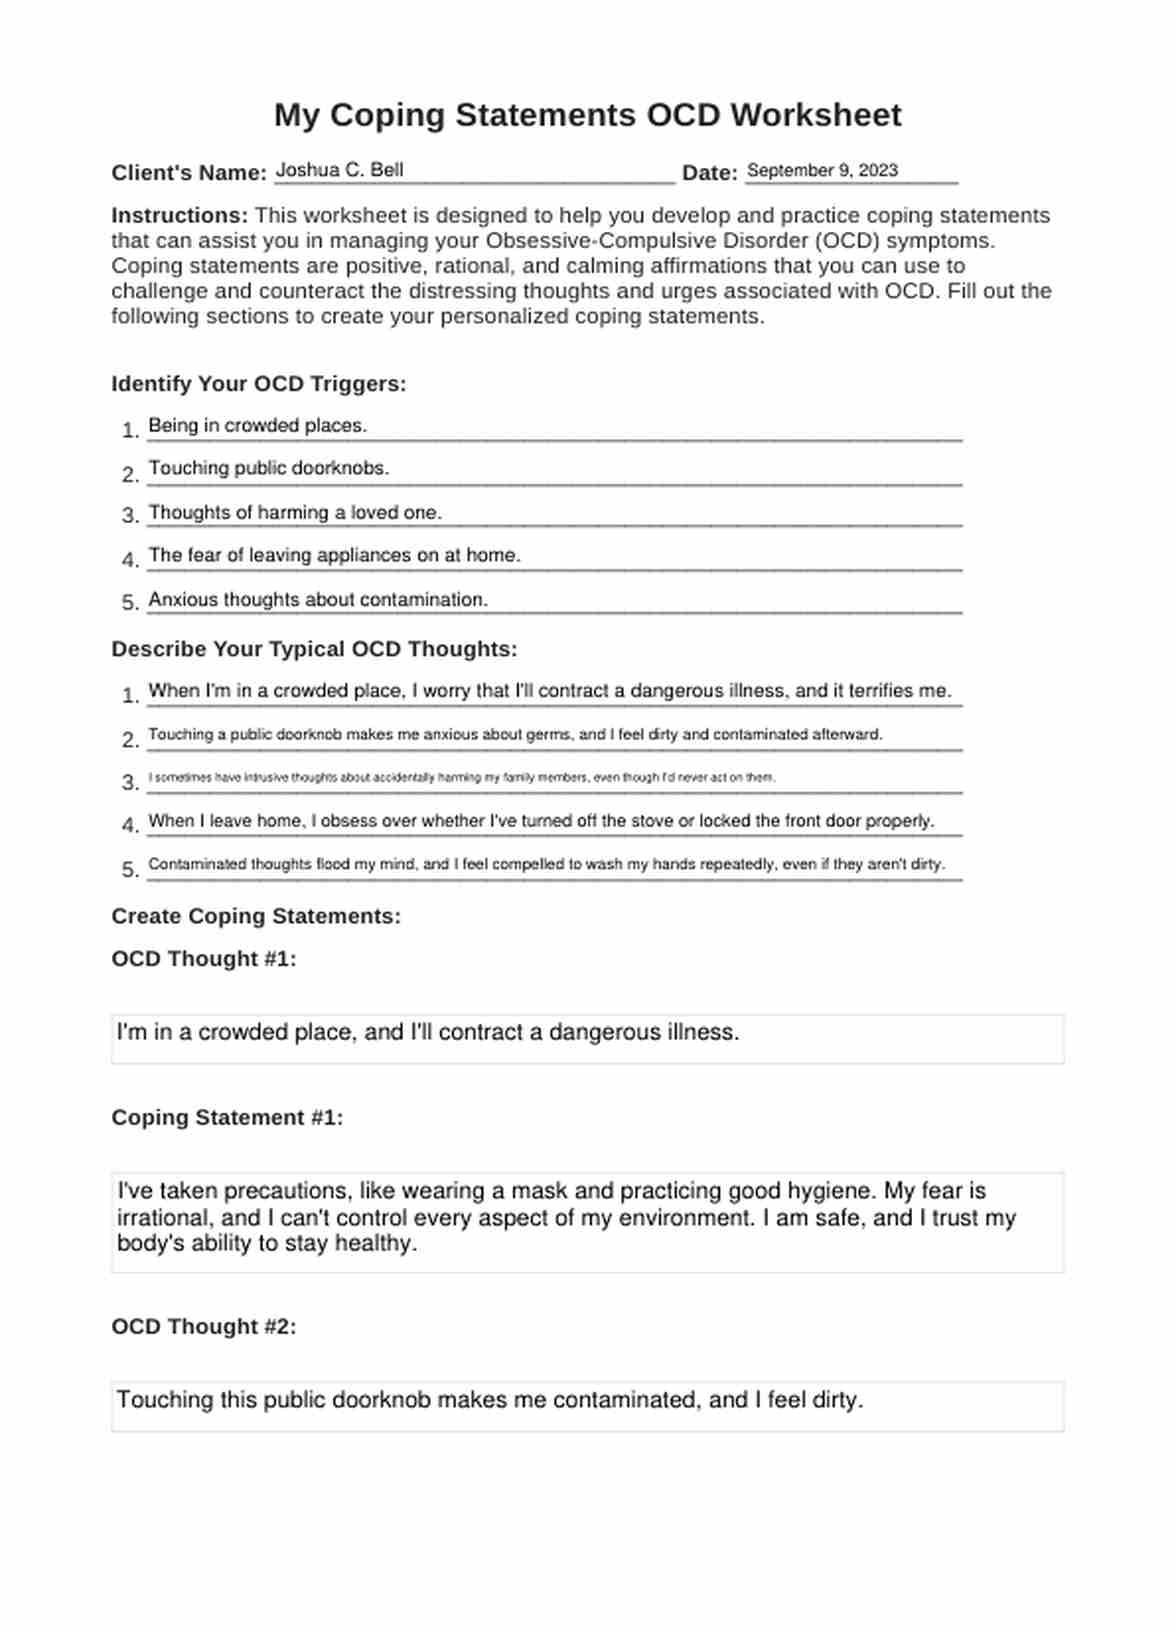 My Coping Statements OCD Worksheet PDF Example